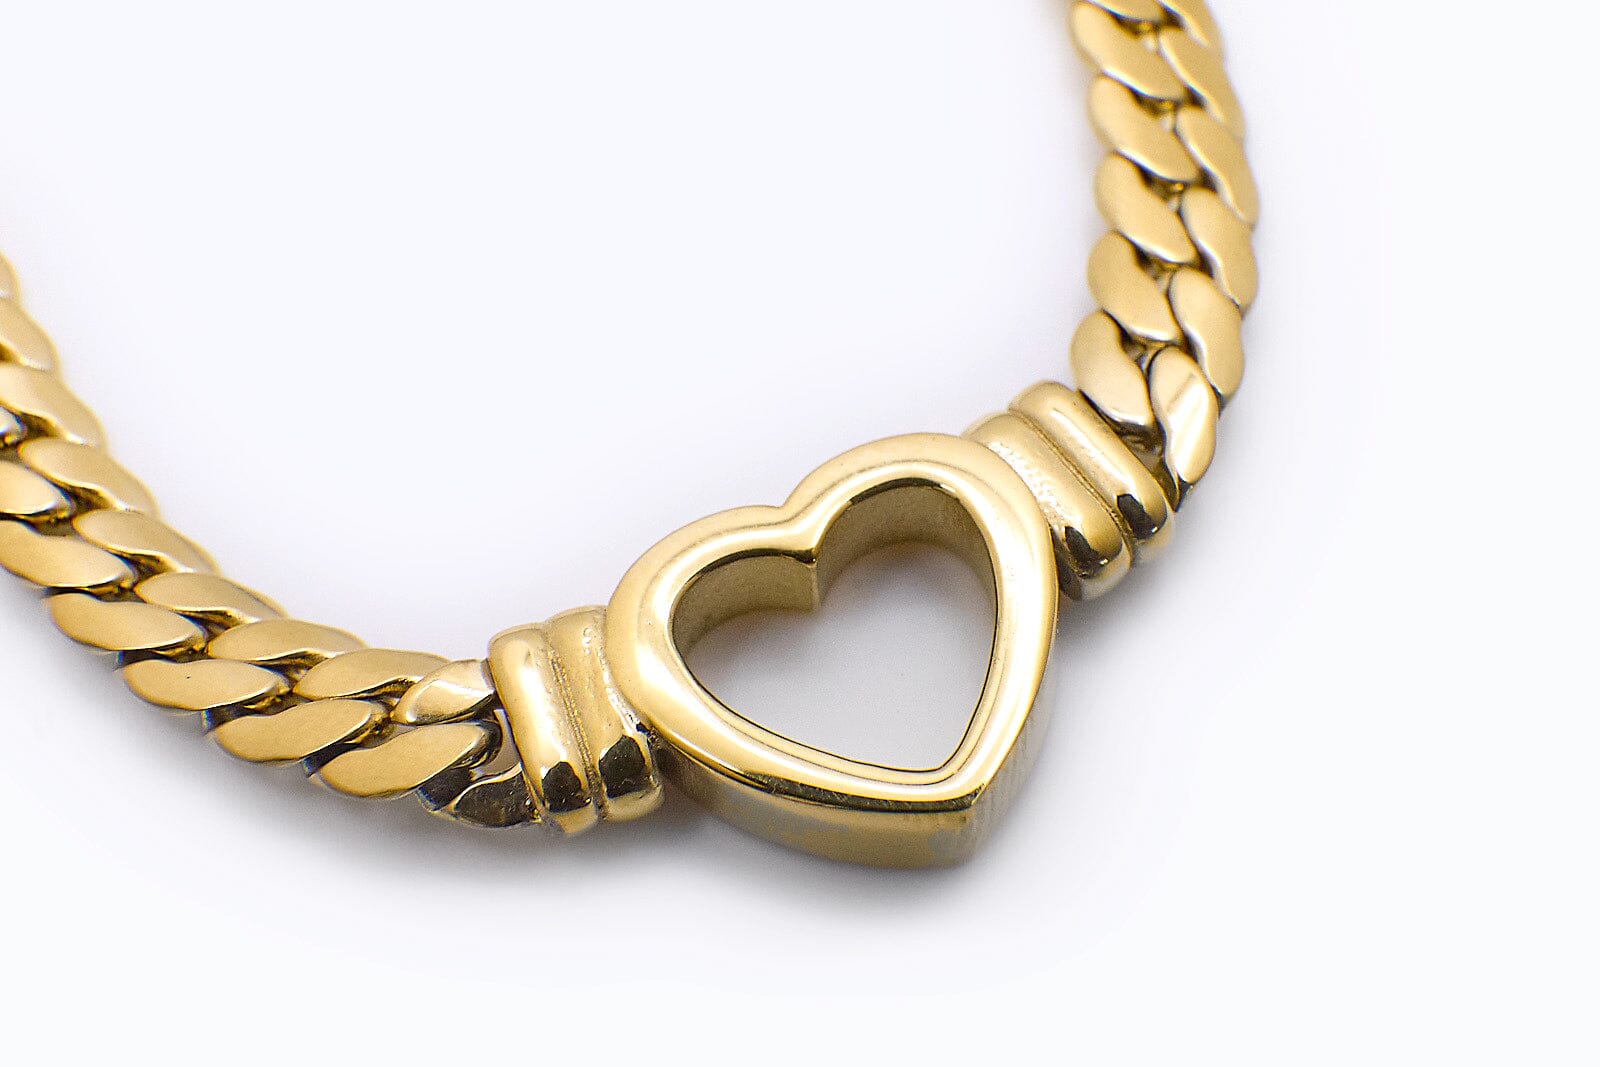 The "I Love You" Gold Collar Heart Necklace Necklace Bloo & Ro 